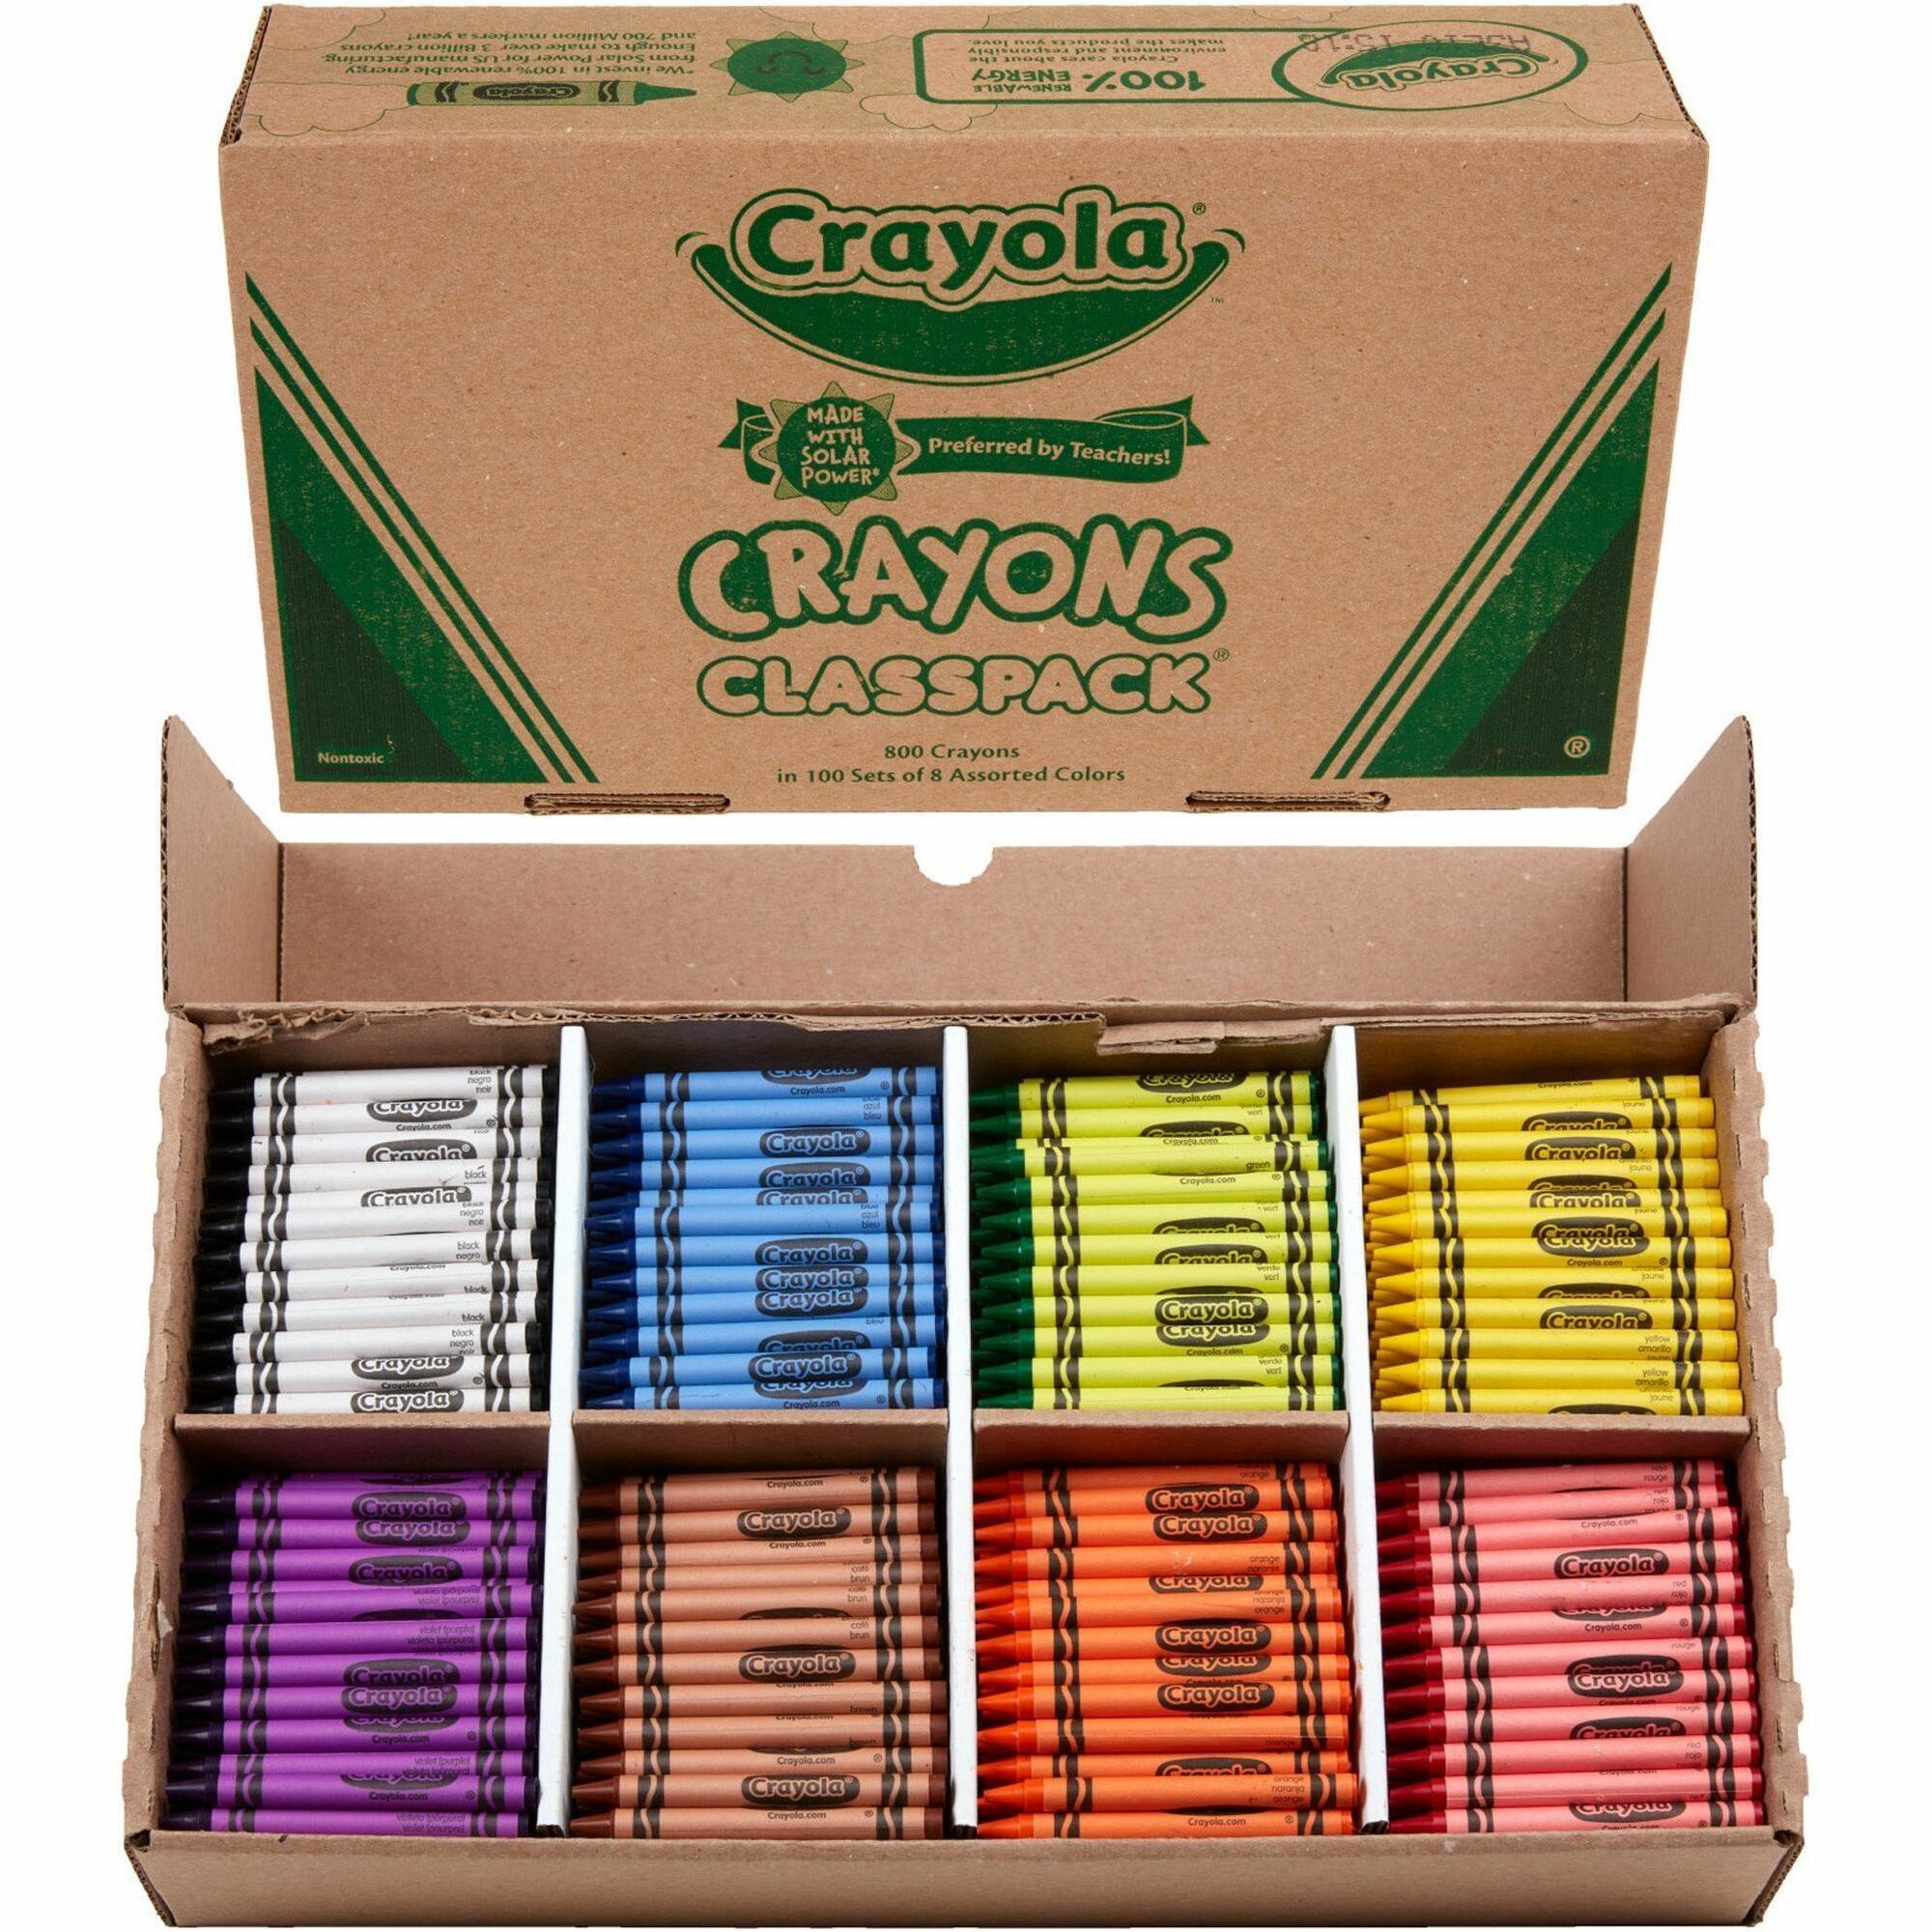 Bring the Crayons Home: A Box of Crayons, Letter-Writing Paper, and  Envelopes (General merchandise)